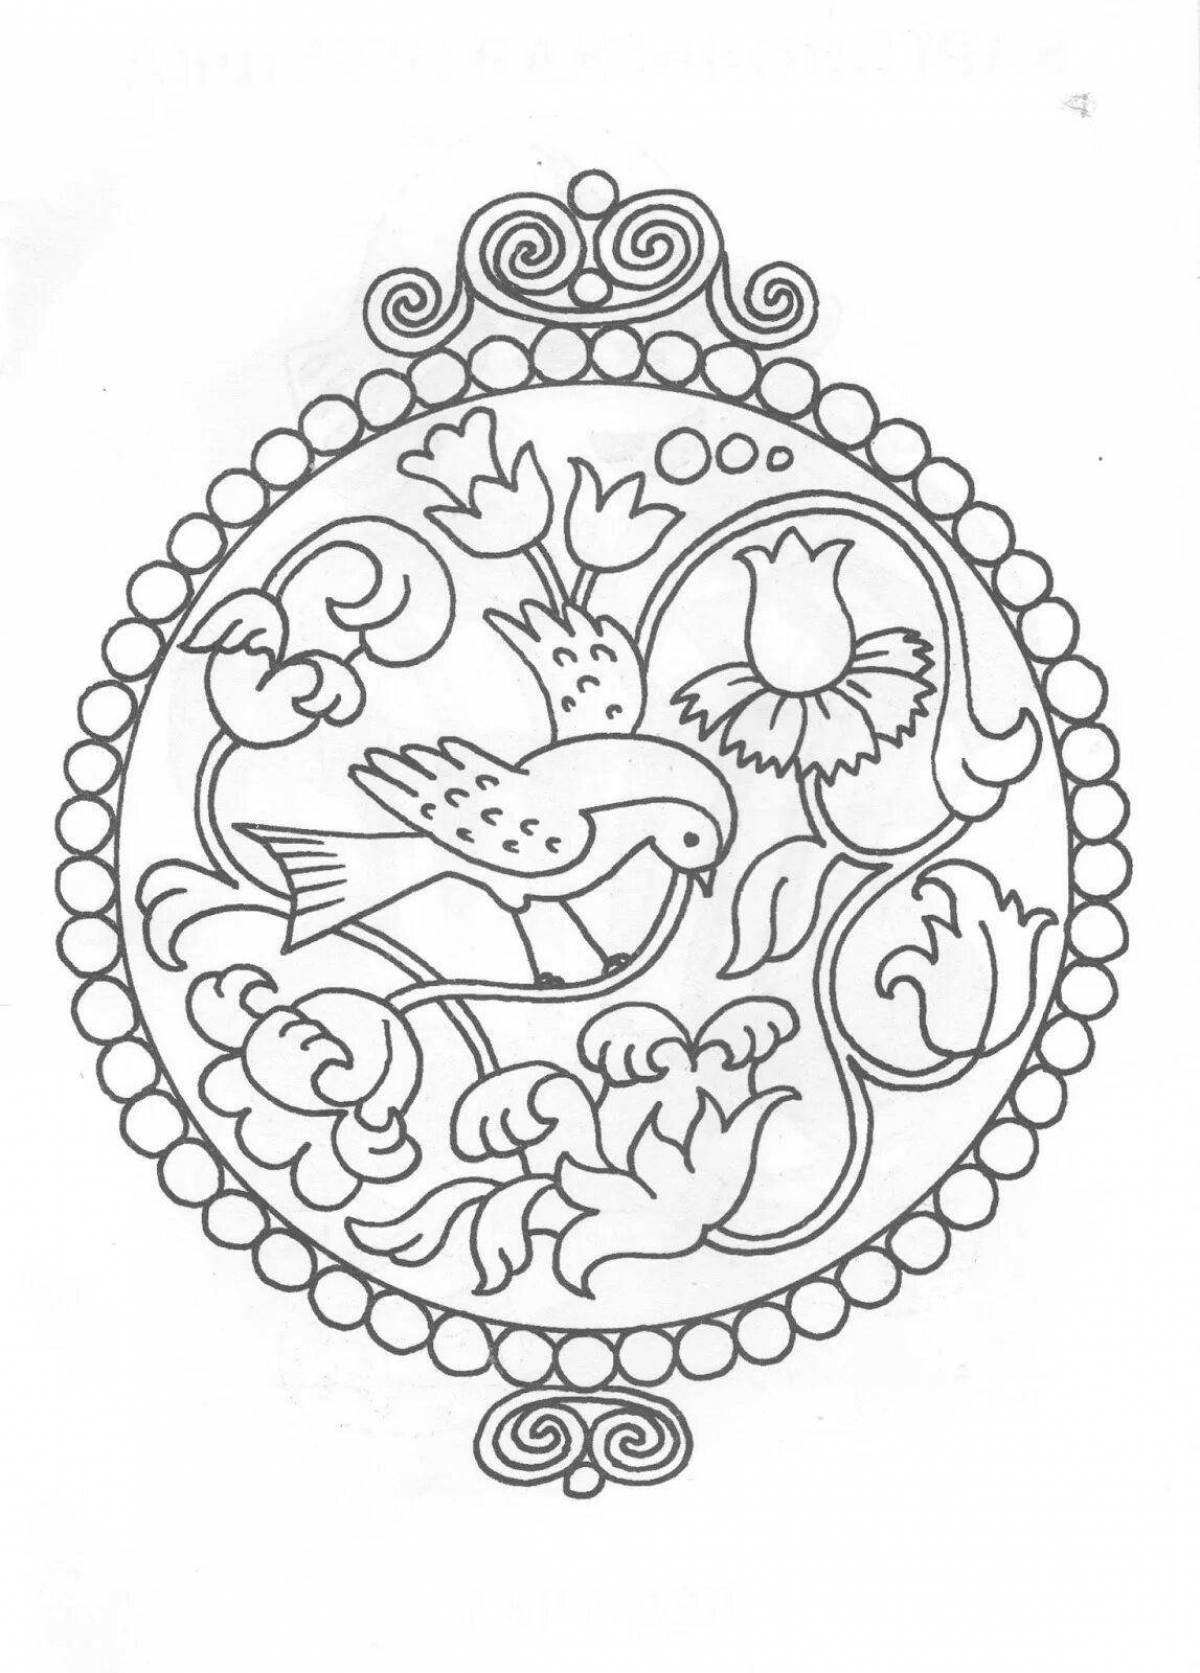 Creative Gorodets coloring plate